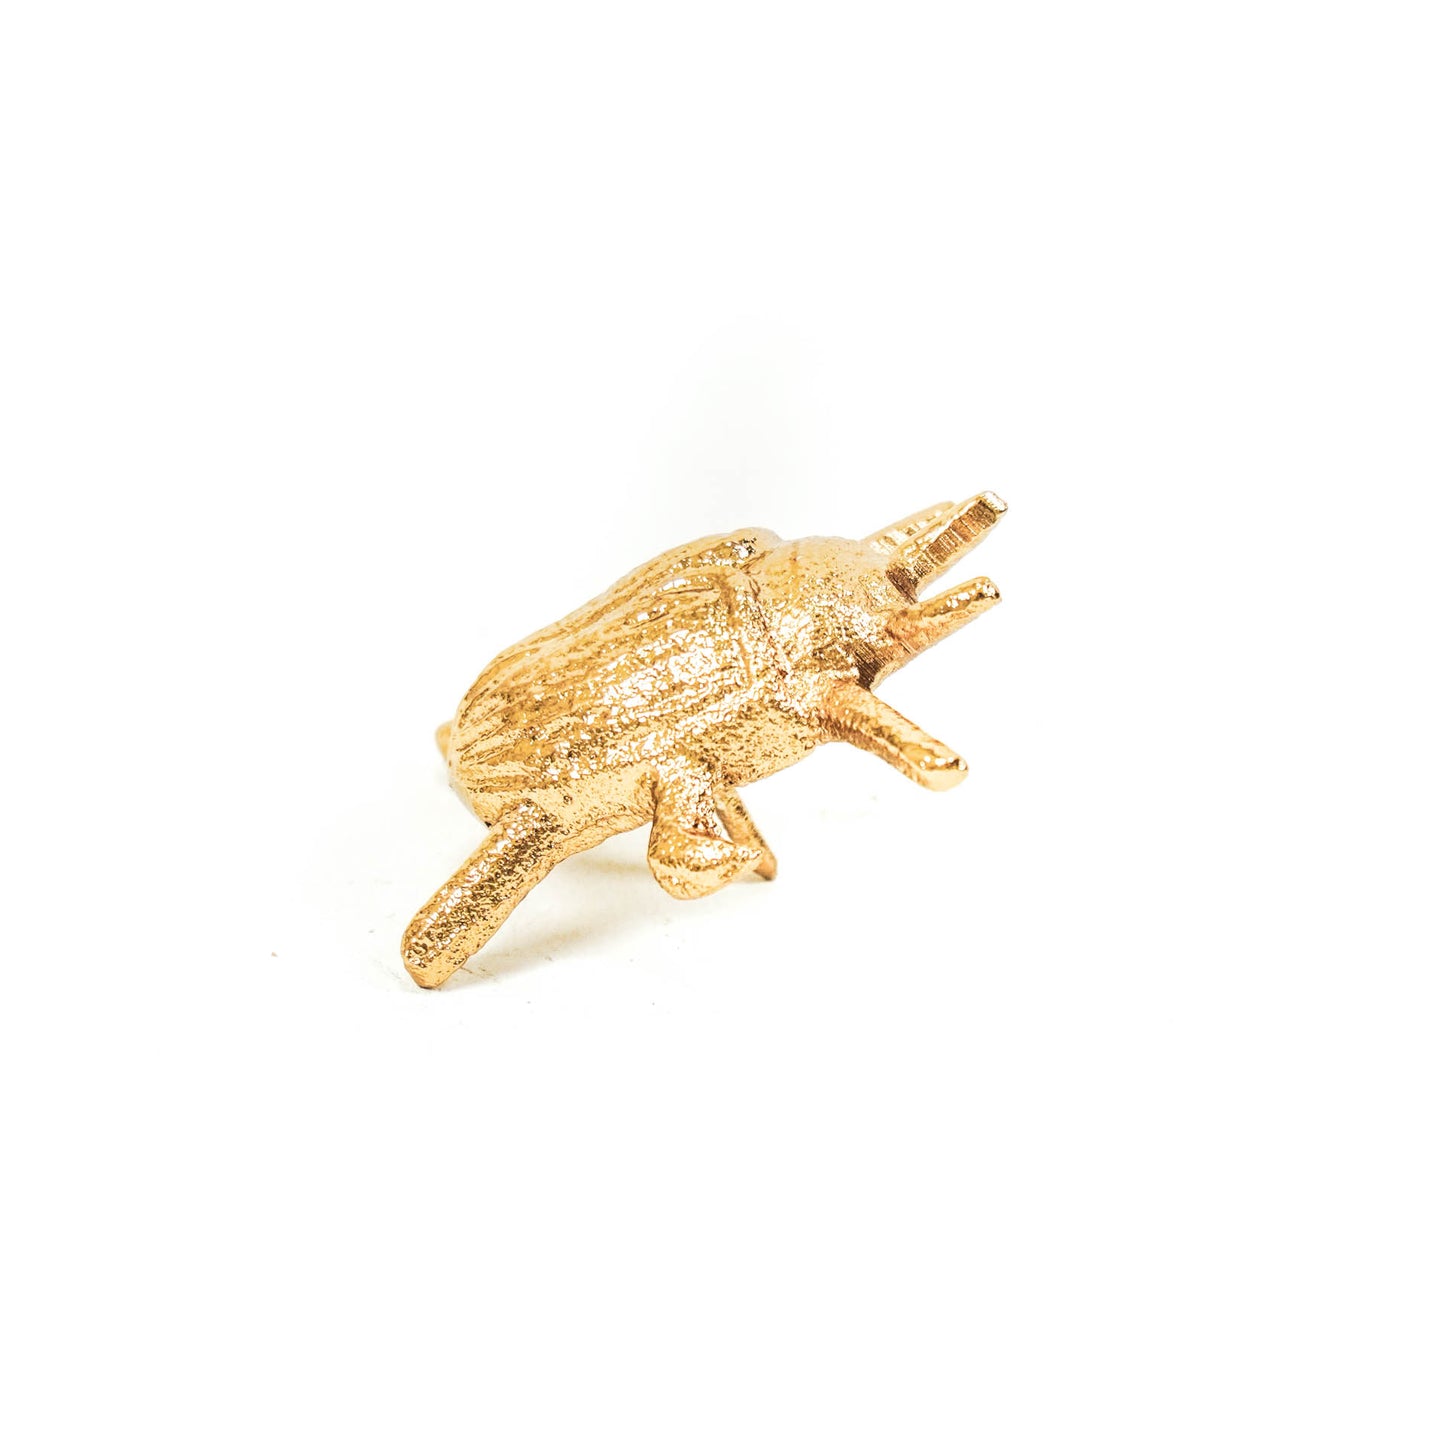 HV Bug Candle Pins - Gold - Set of 2 - 6x5x2cm